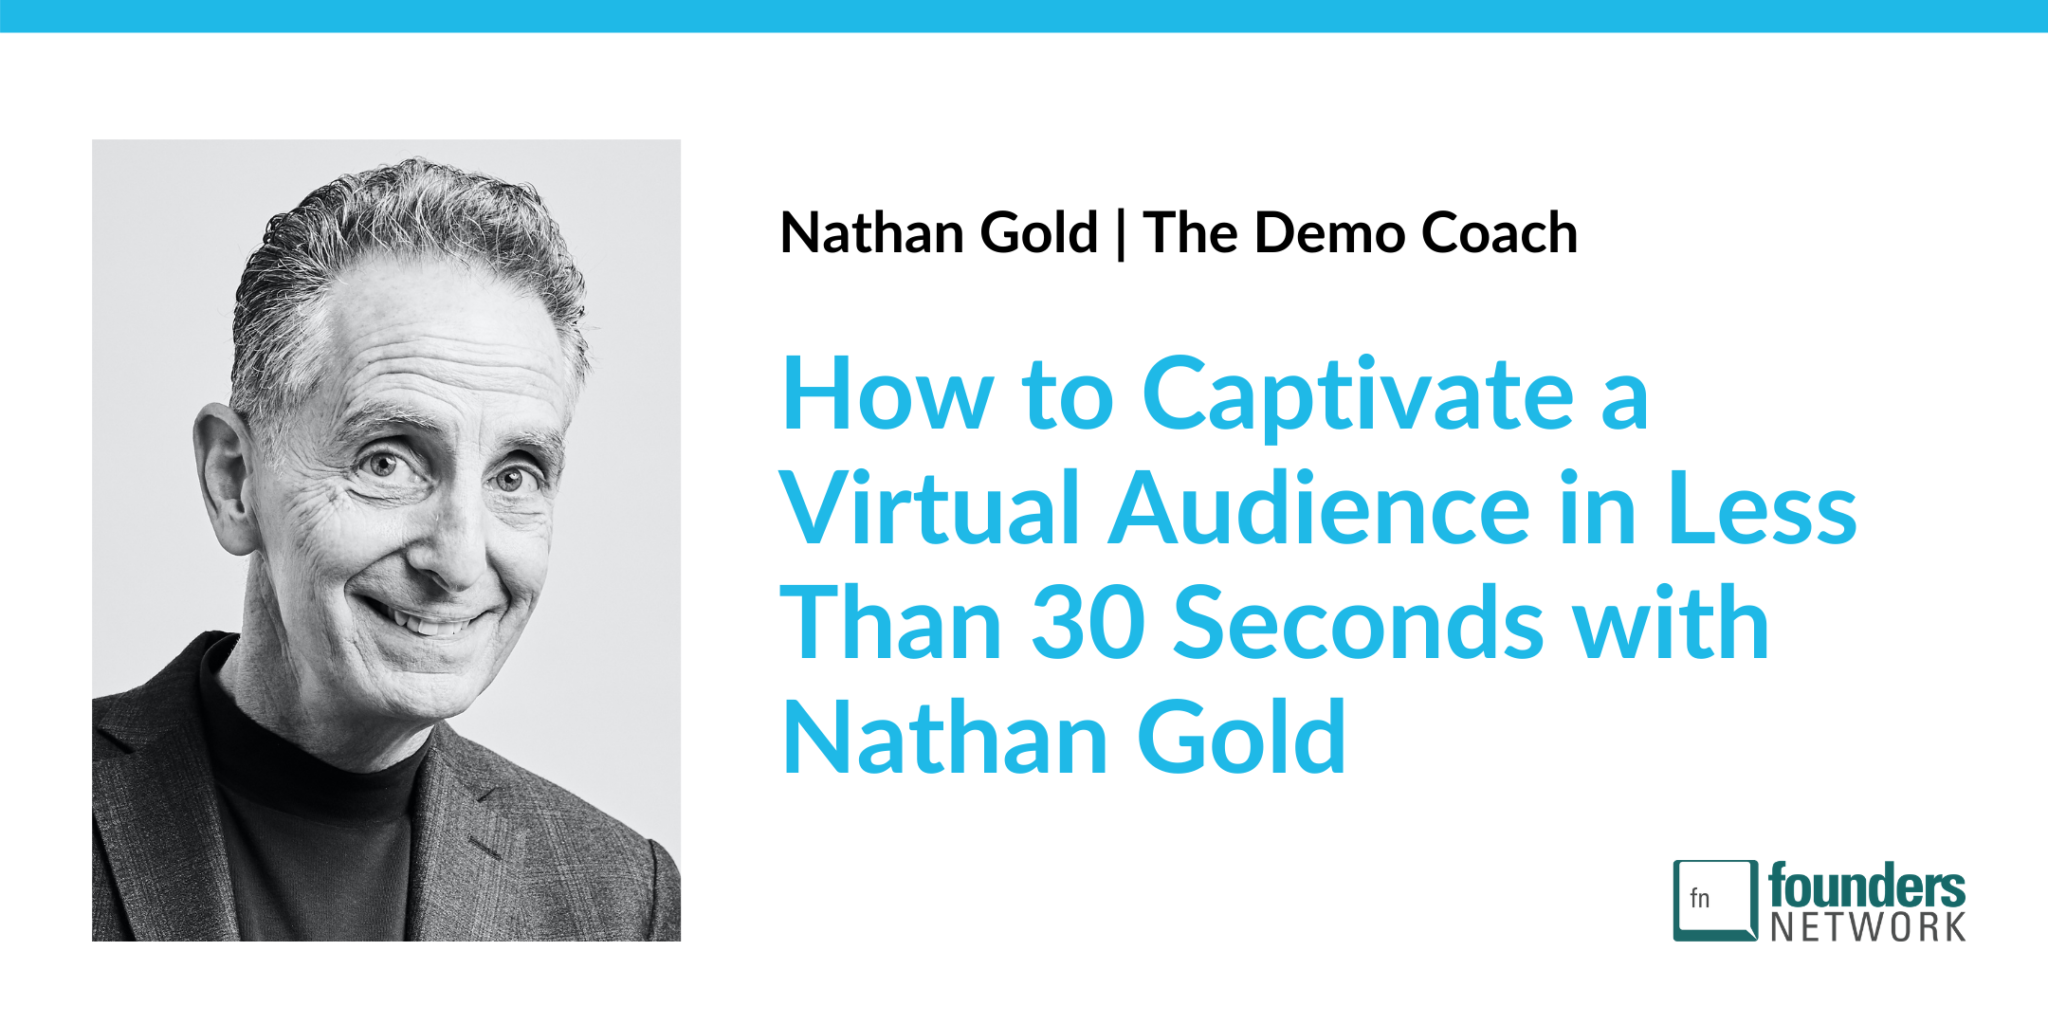 How to Captivate any Audience in Less Than 30-Seconds with Nathan Gold Eventbrite Header Image 2160px x 1080px (1)